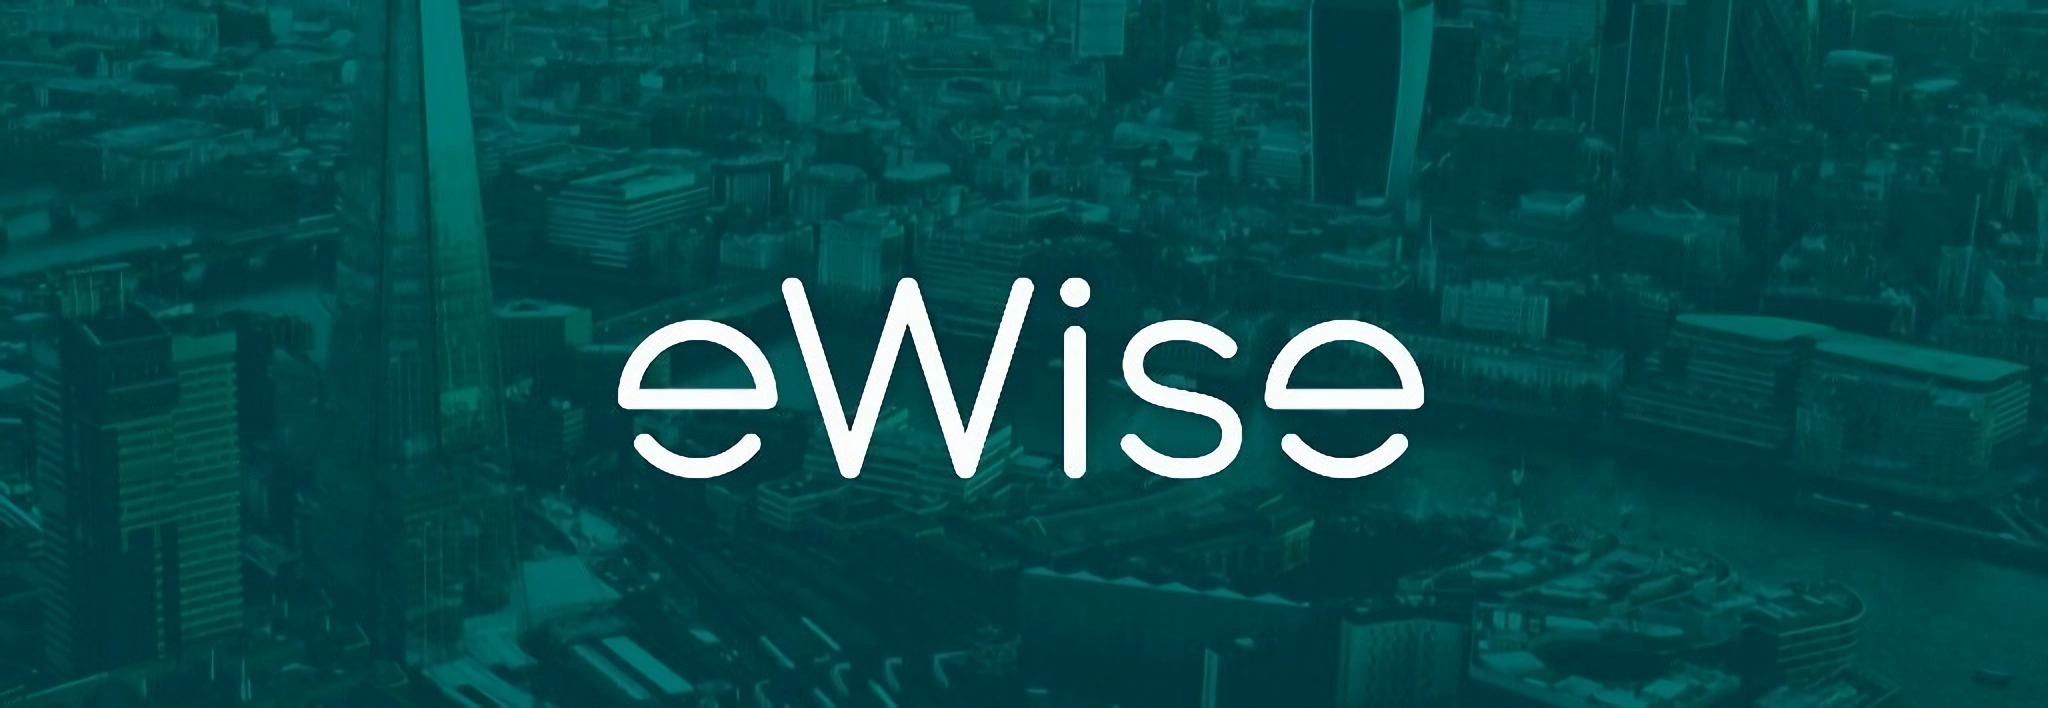 eWise logo with London in background